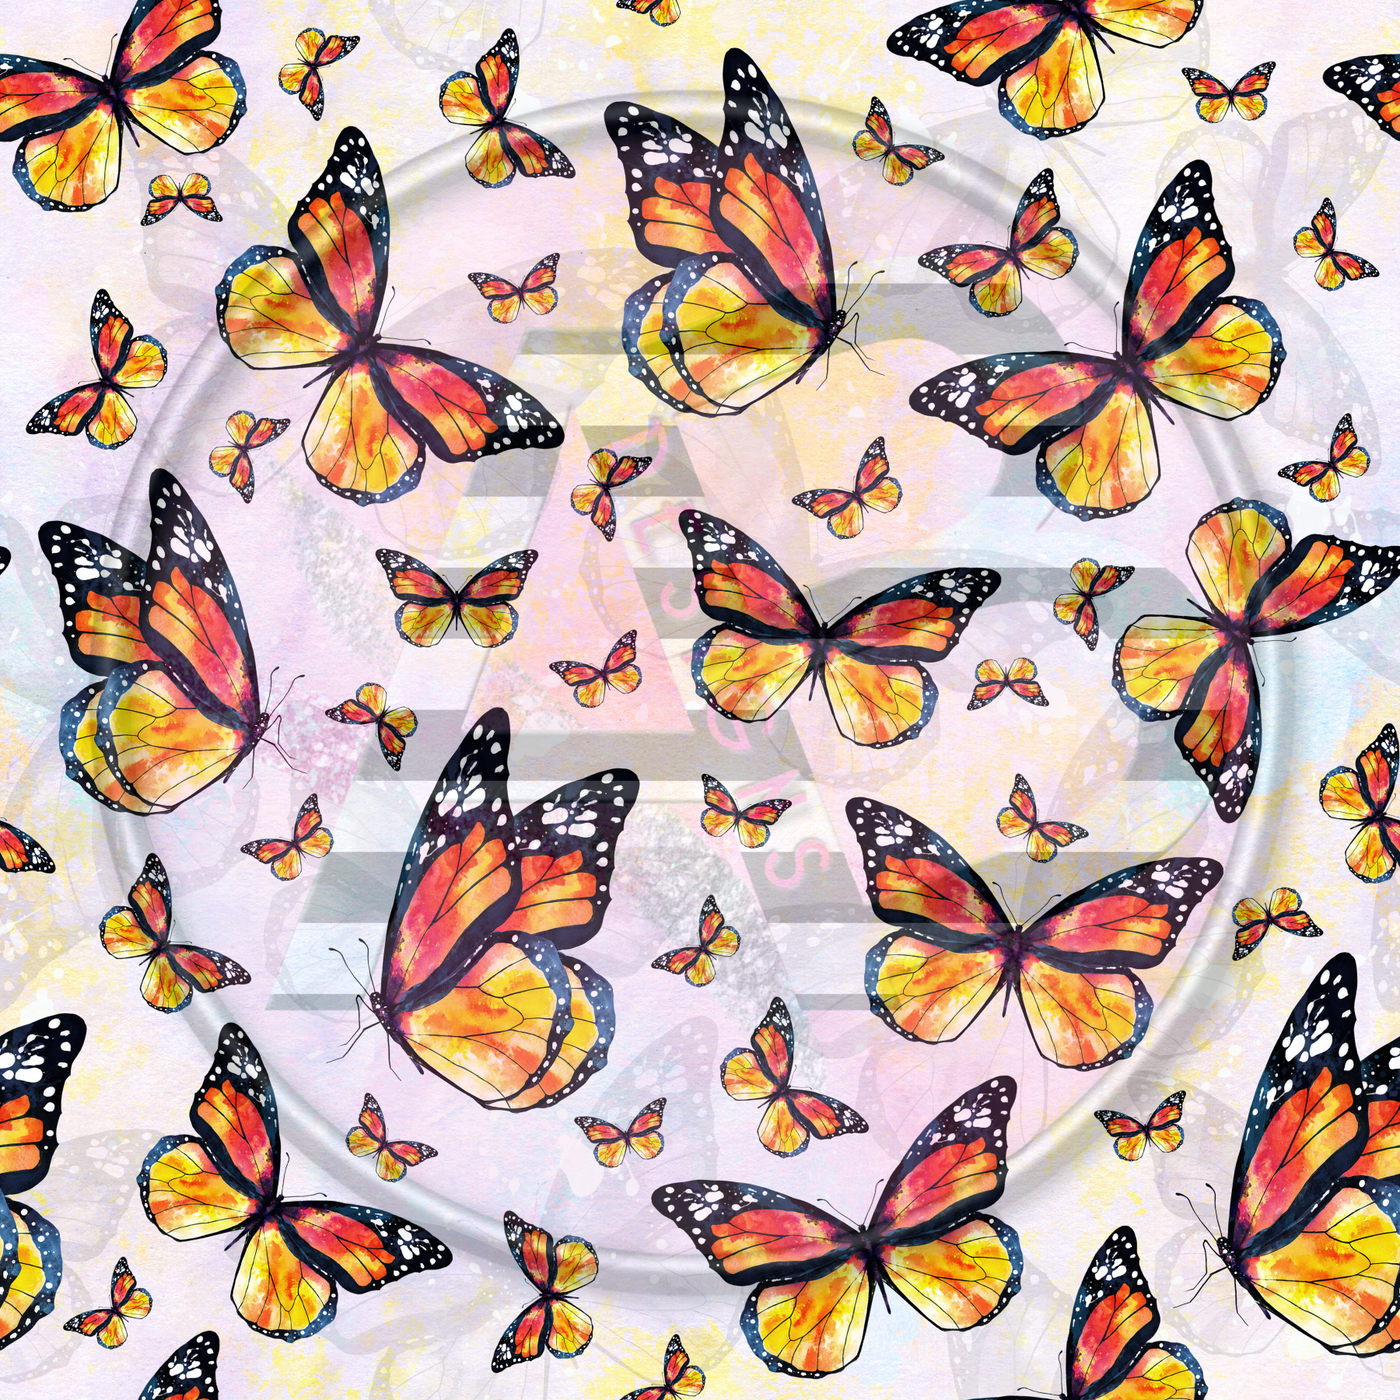 Adhesive Patterned Vinyl - Butterfly 5